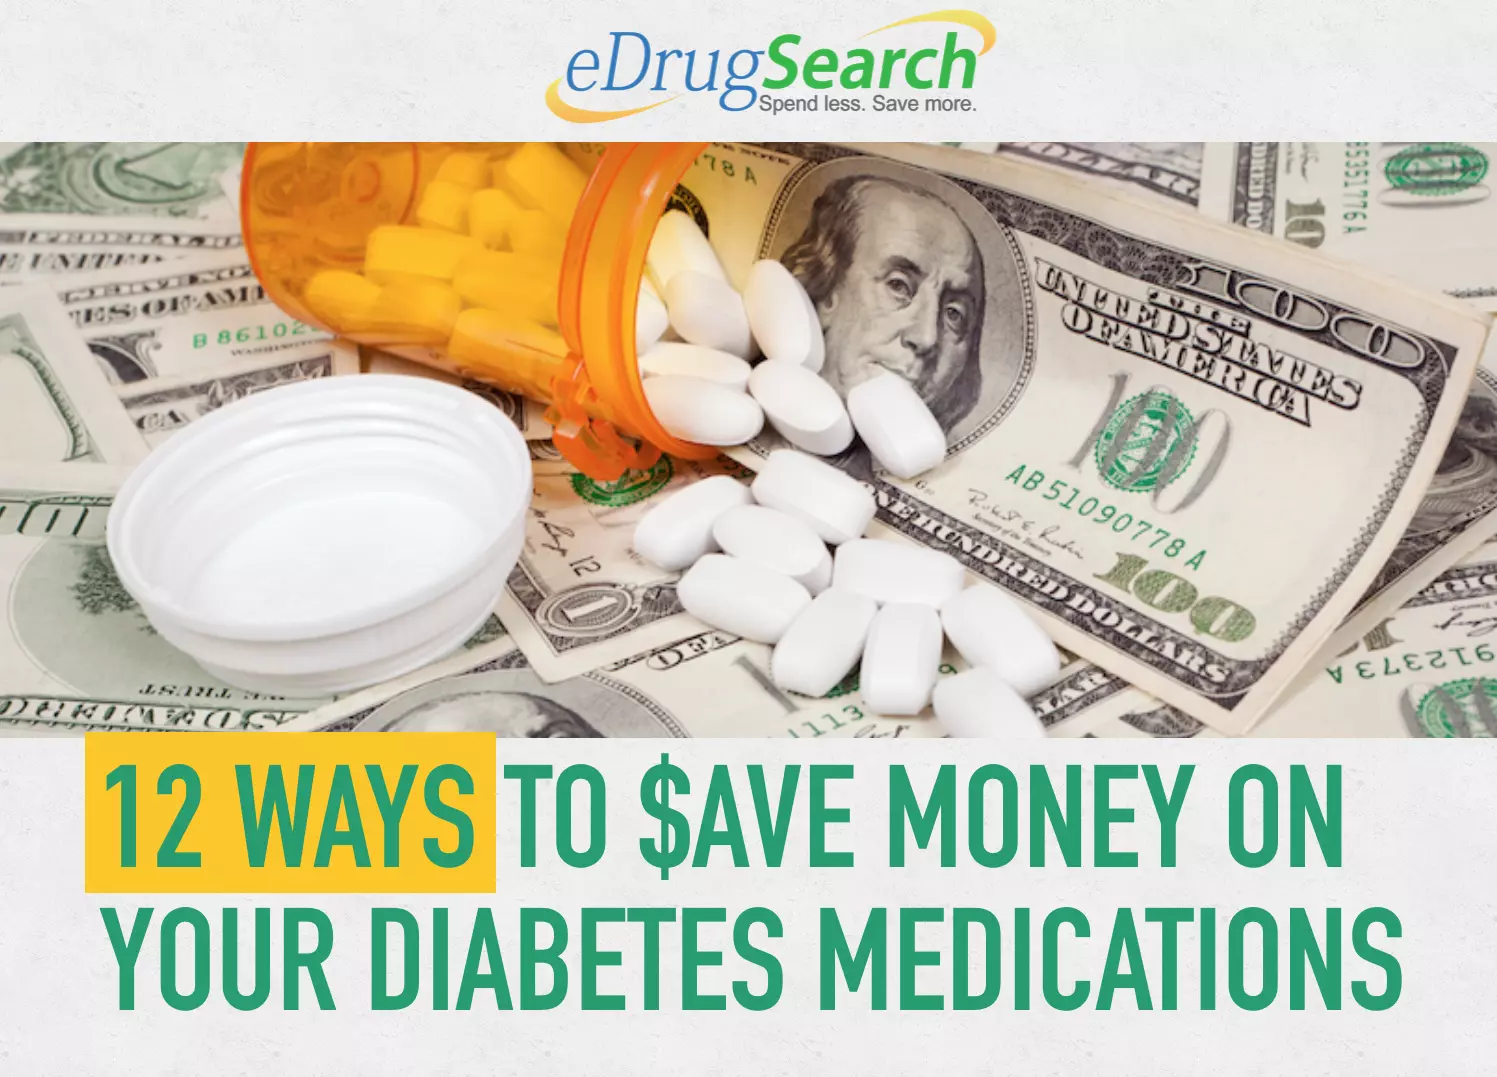 12 Ways to Save Money on Your Diabetes Medications